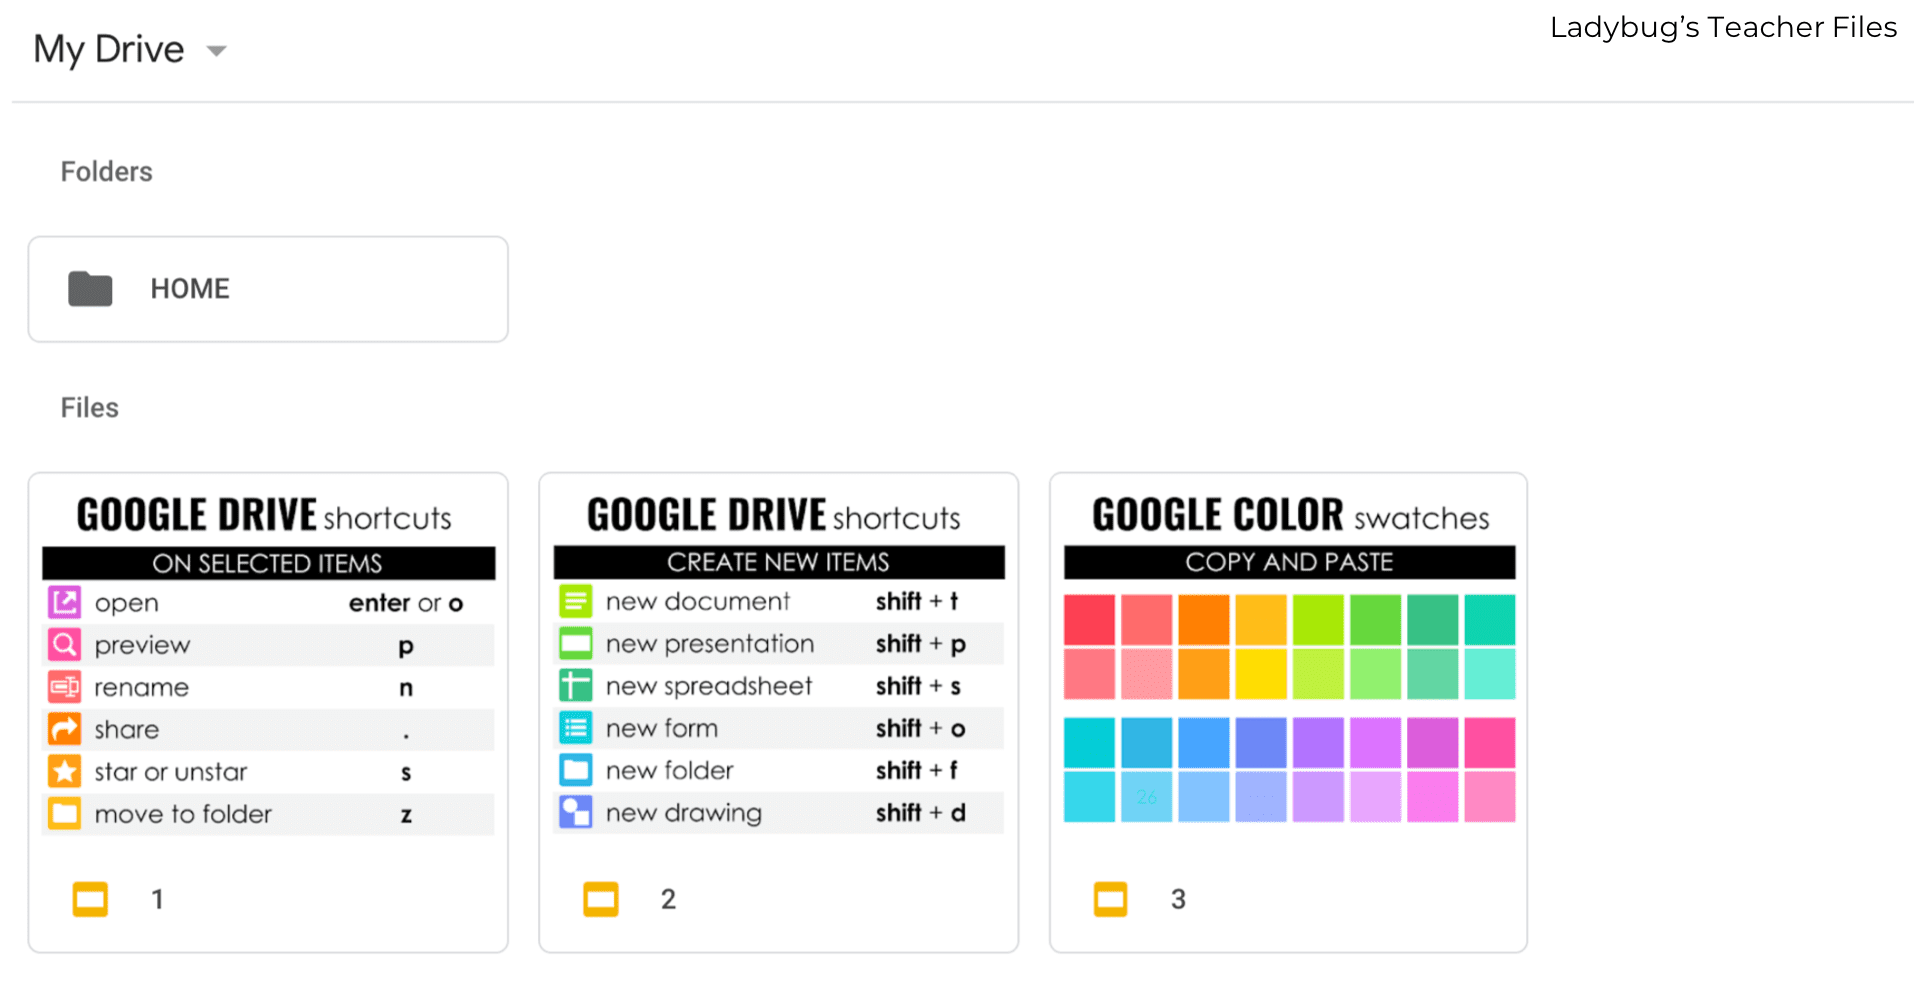 custom color swatches for your google drive